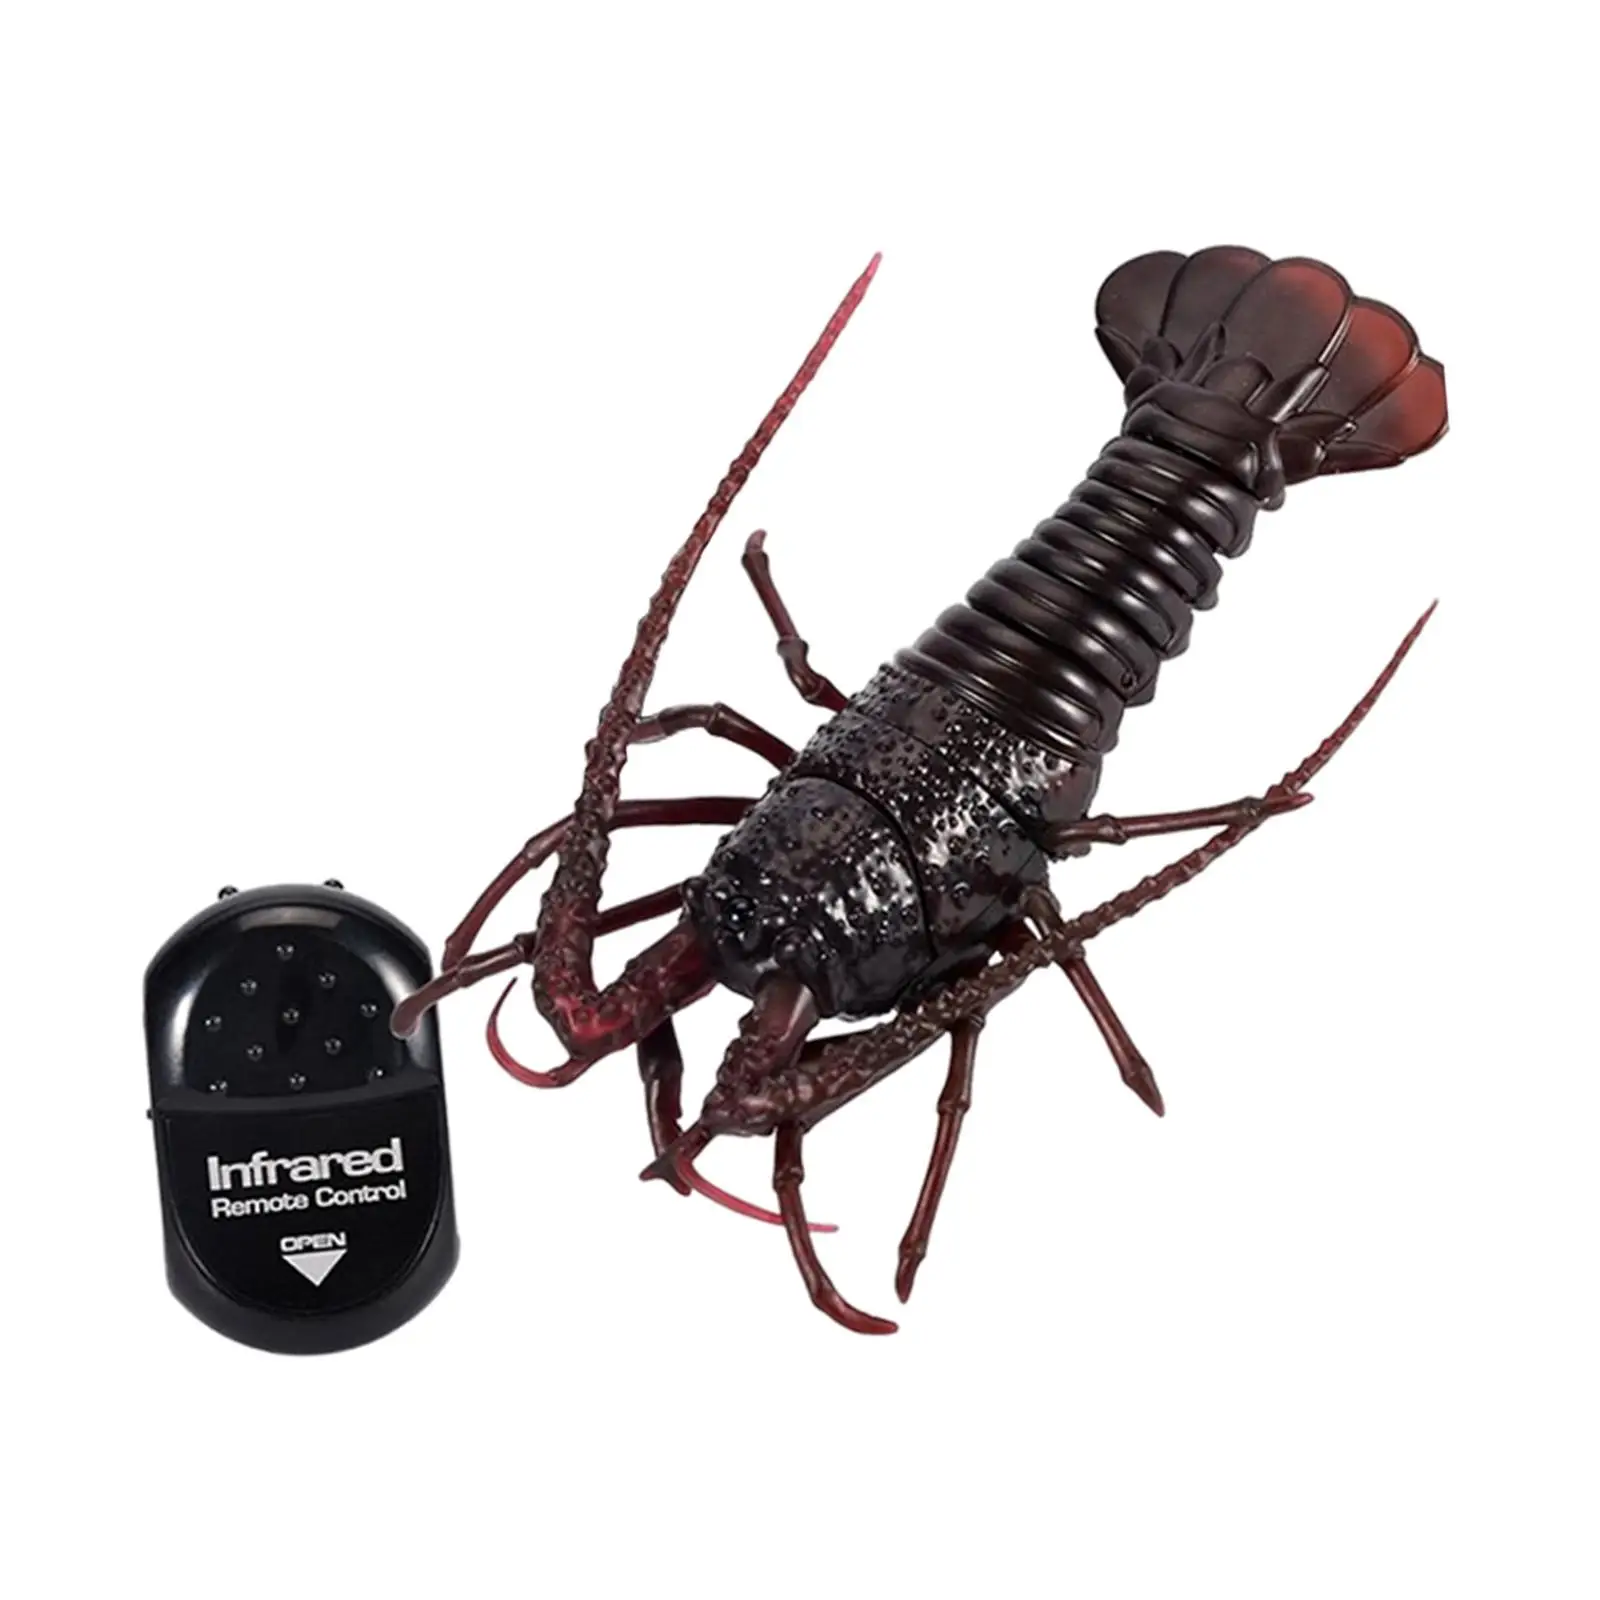 Simulation RC Crawfish Joke Toys Realistic Remote Control Vehicle Car Animal Electric Infrared RC Shrimp for Toddler Kids Gifts